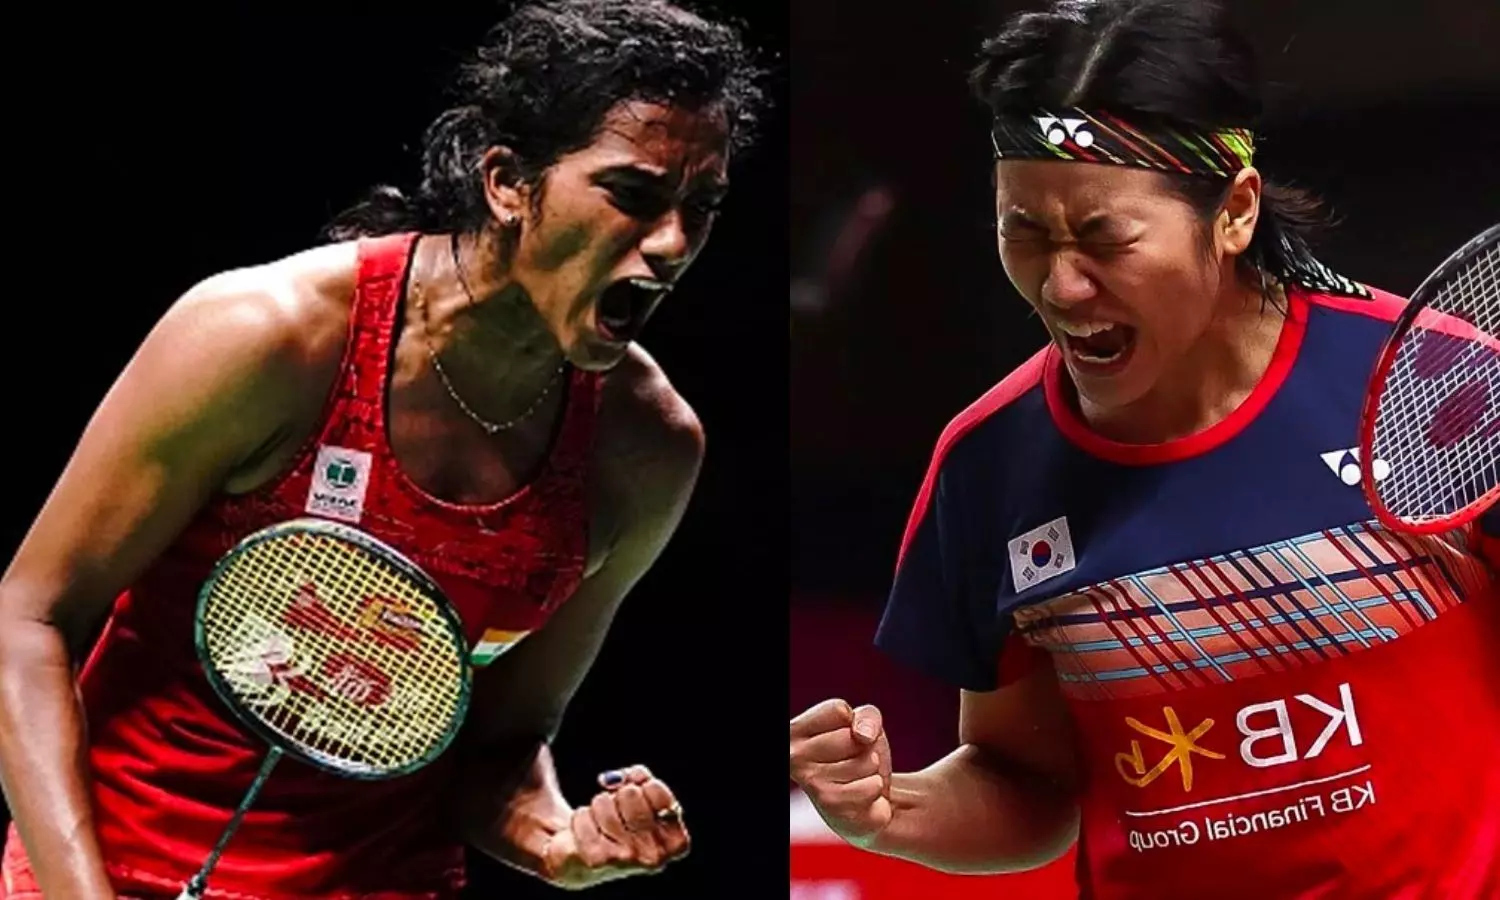 2021 championships bwf world How to